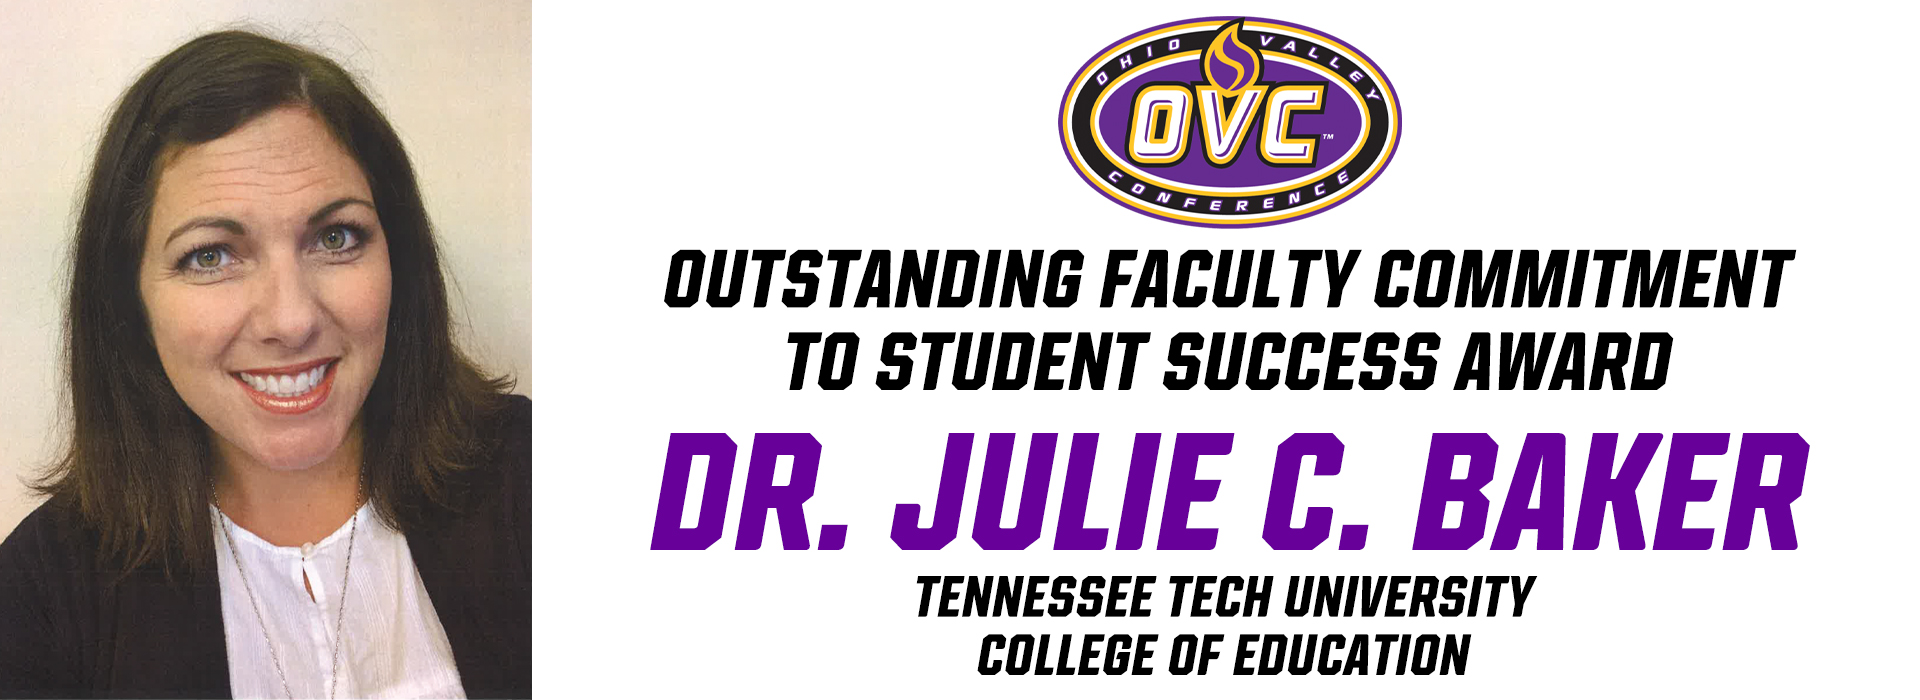 Dr. Julie C. Baker recognized as OVC Outstanding Faculty Commitment to Student Success Award winner for Tech